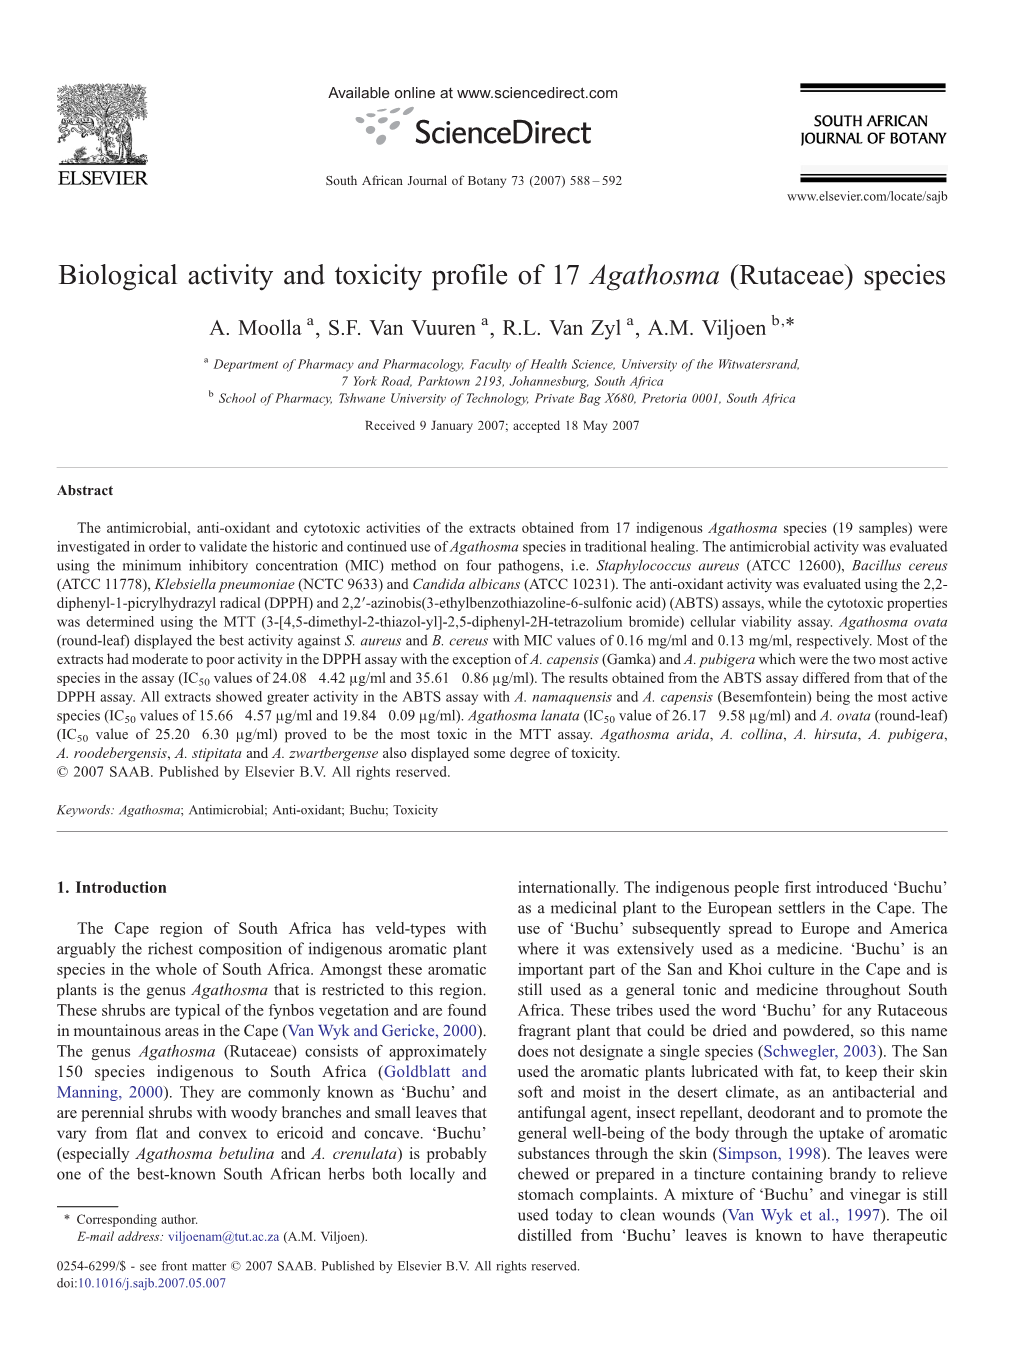 Biological Activity and Toxicity Profile of 17 Agathosma (Rutaceae) Species ⁎ A